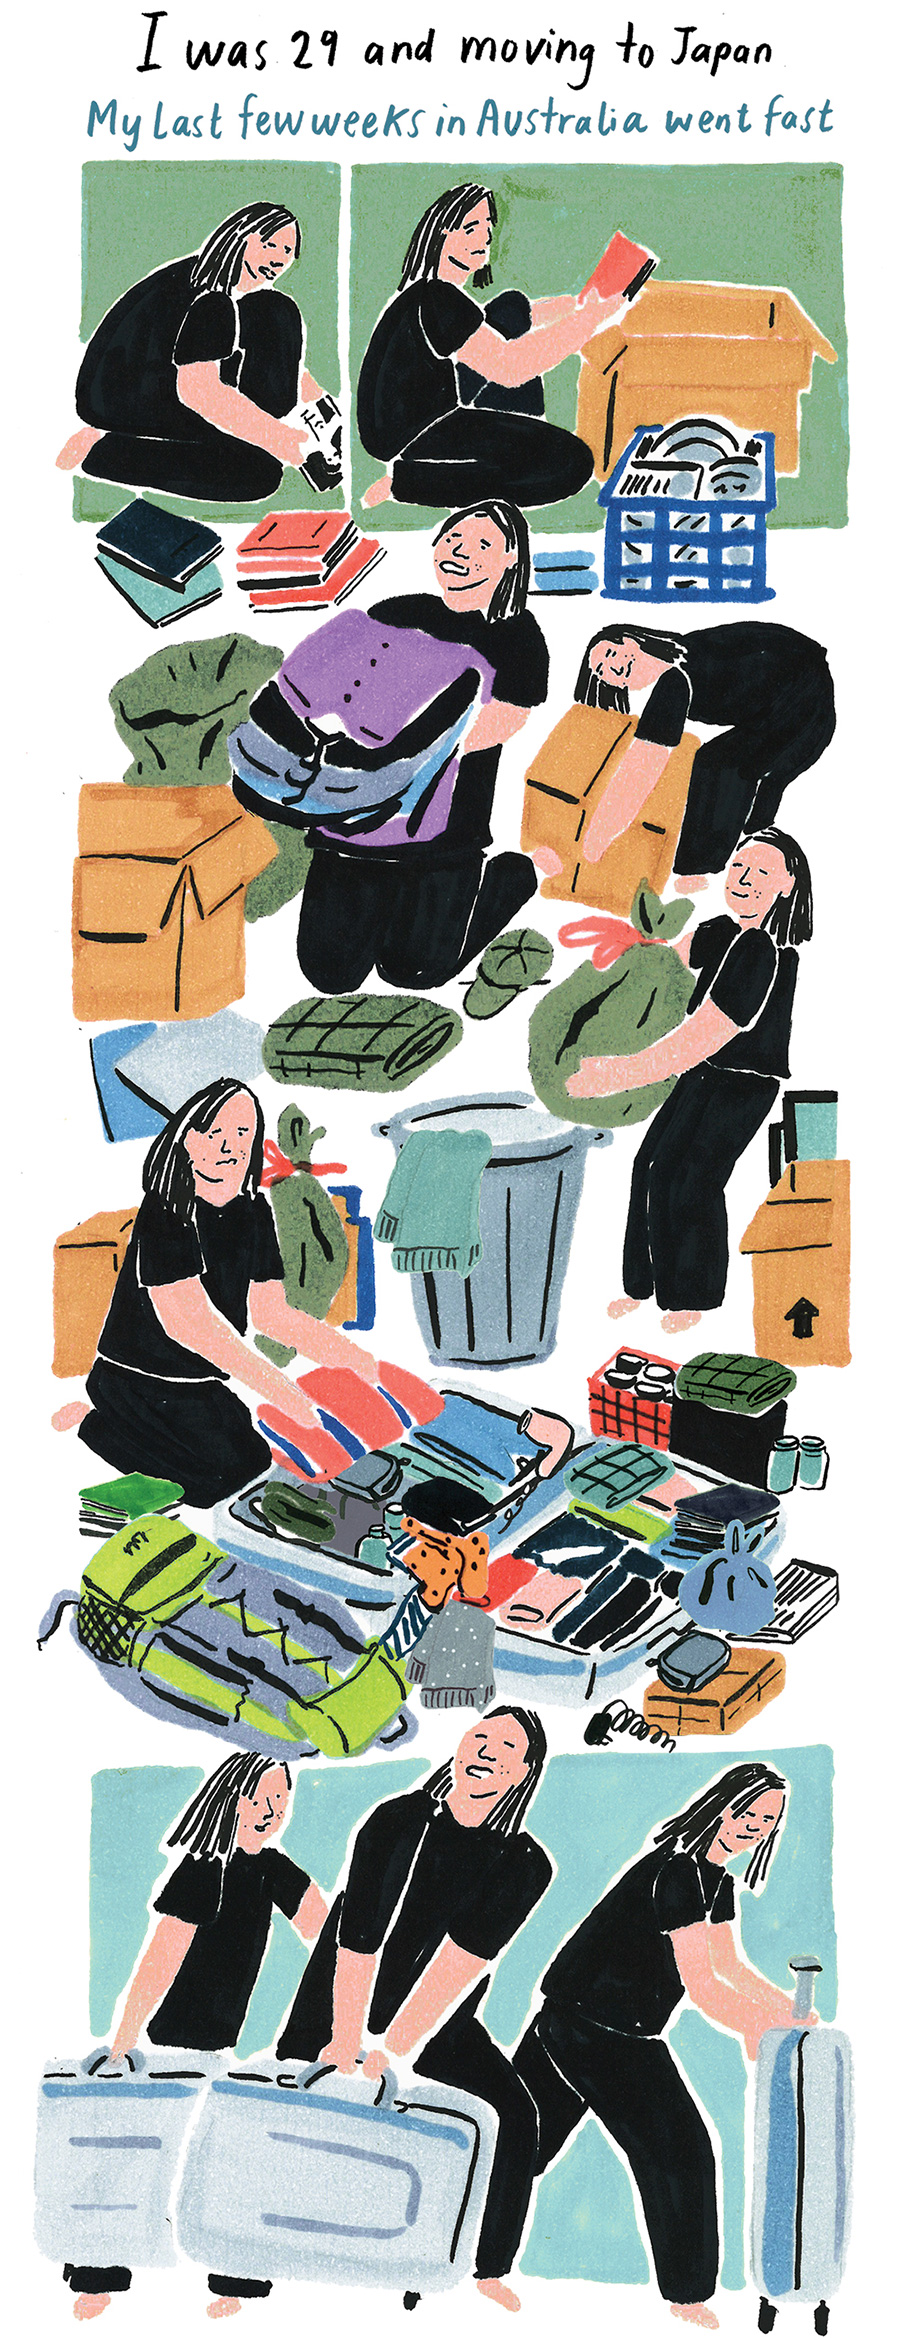 "I was 29 and moving to Japan. My last few weeks in Australia went fast." Illustration shows Grace packing and decluttering.